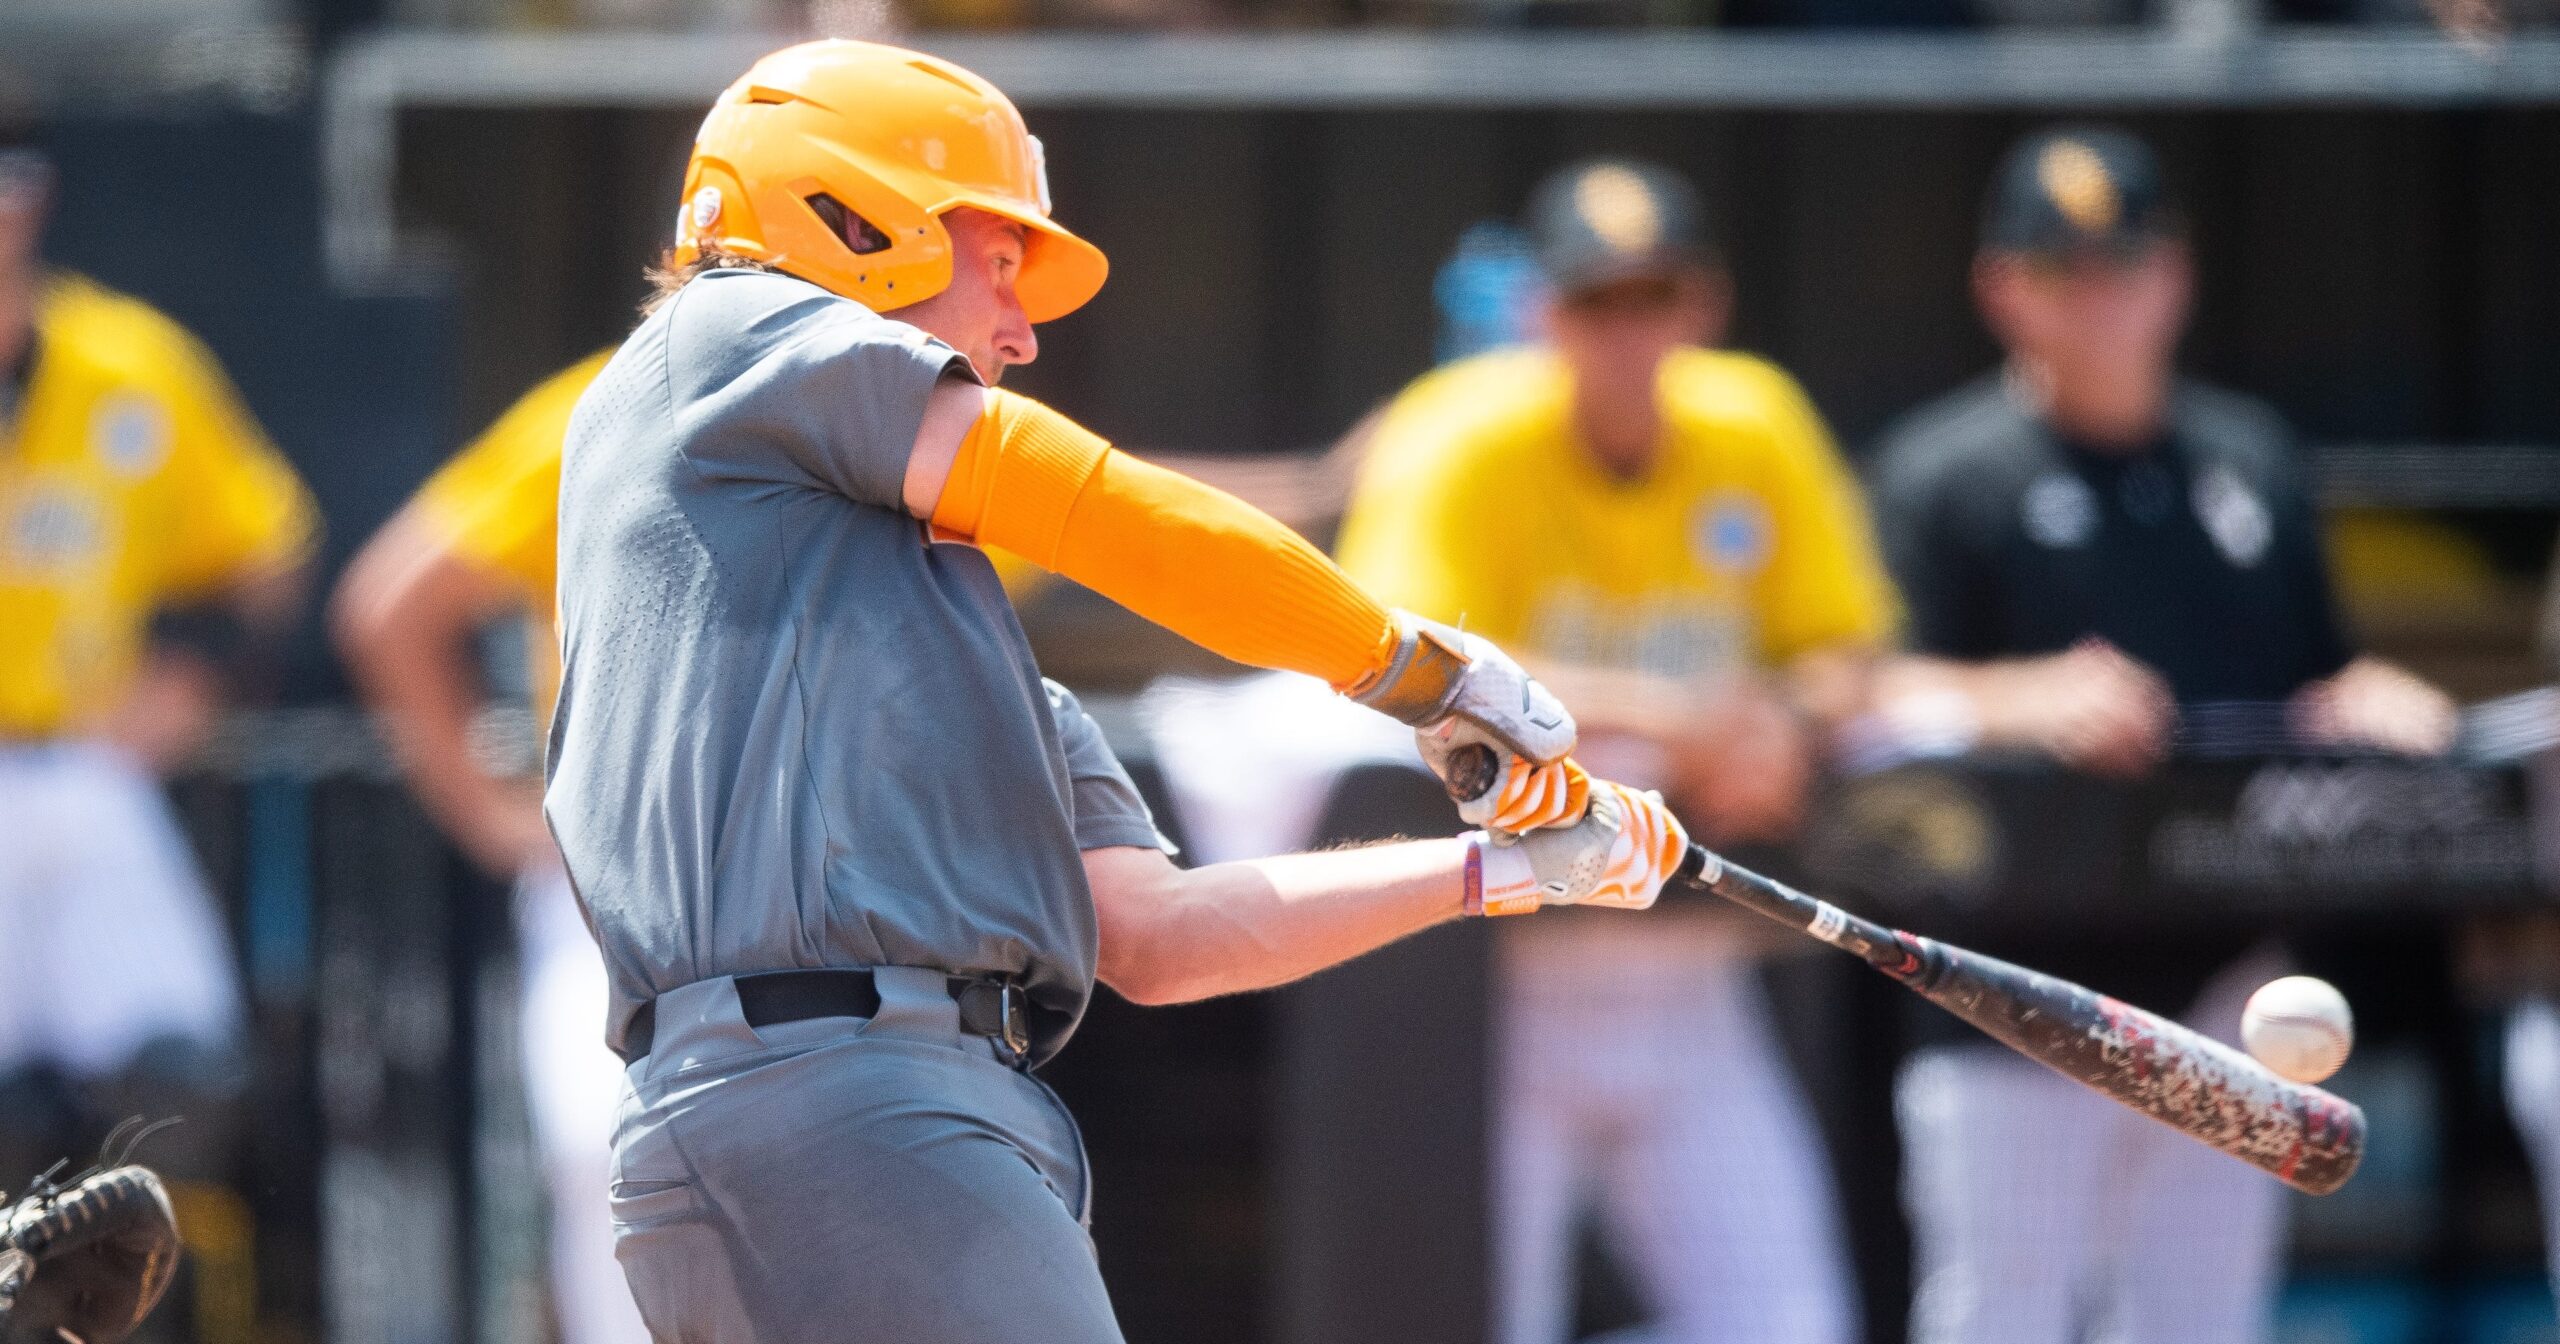 Sources: Tennessee vs. Southern Miss Game 3 may be delayed